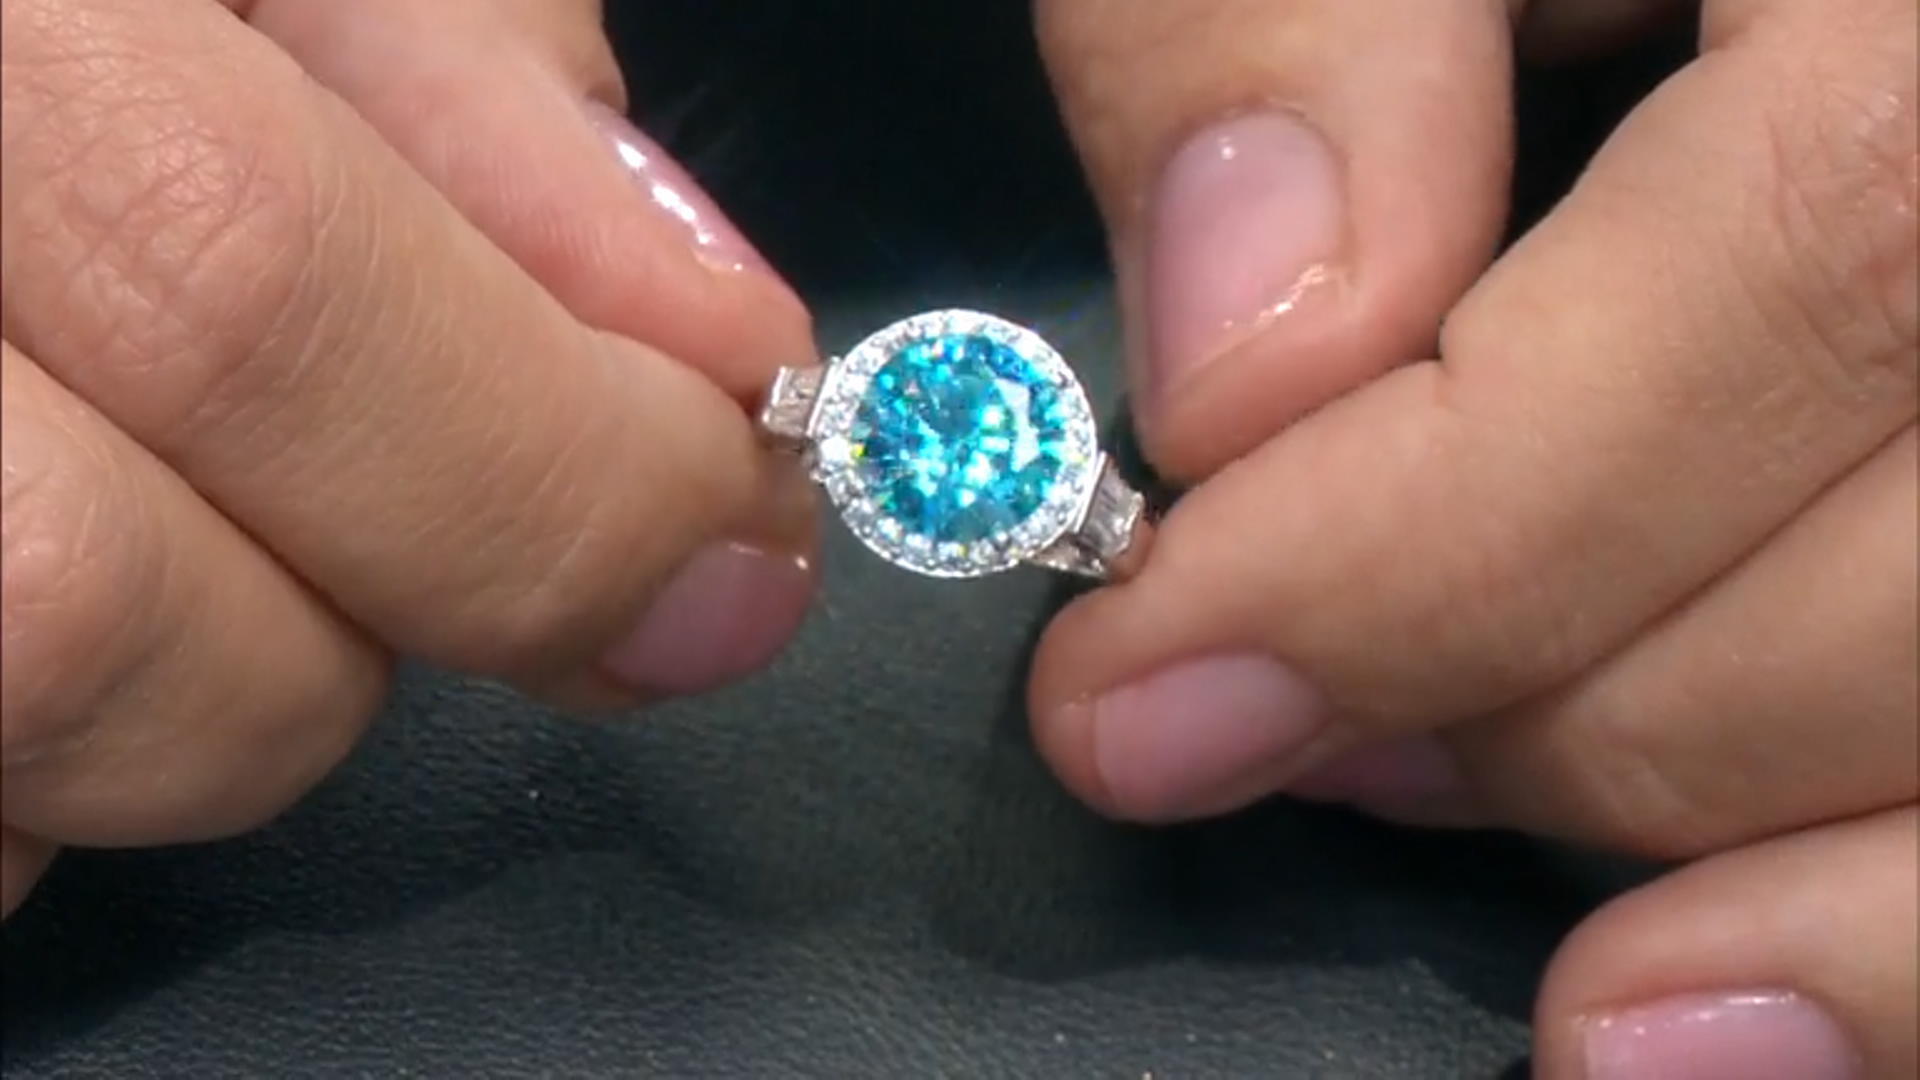 Blue And White Cubic Zirconia Platinum Over Sterling Silver Ring 7.29ctw Video Thumbnail